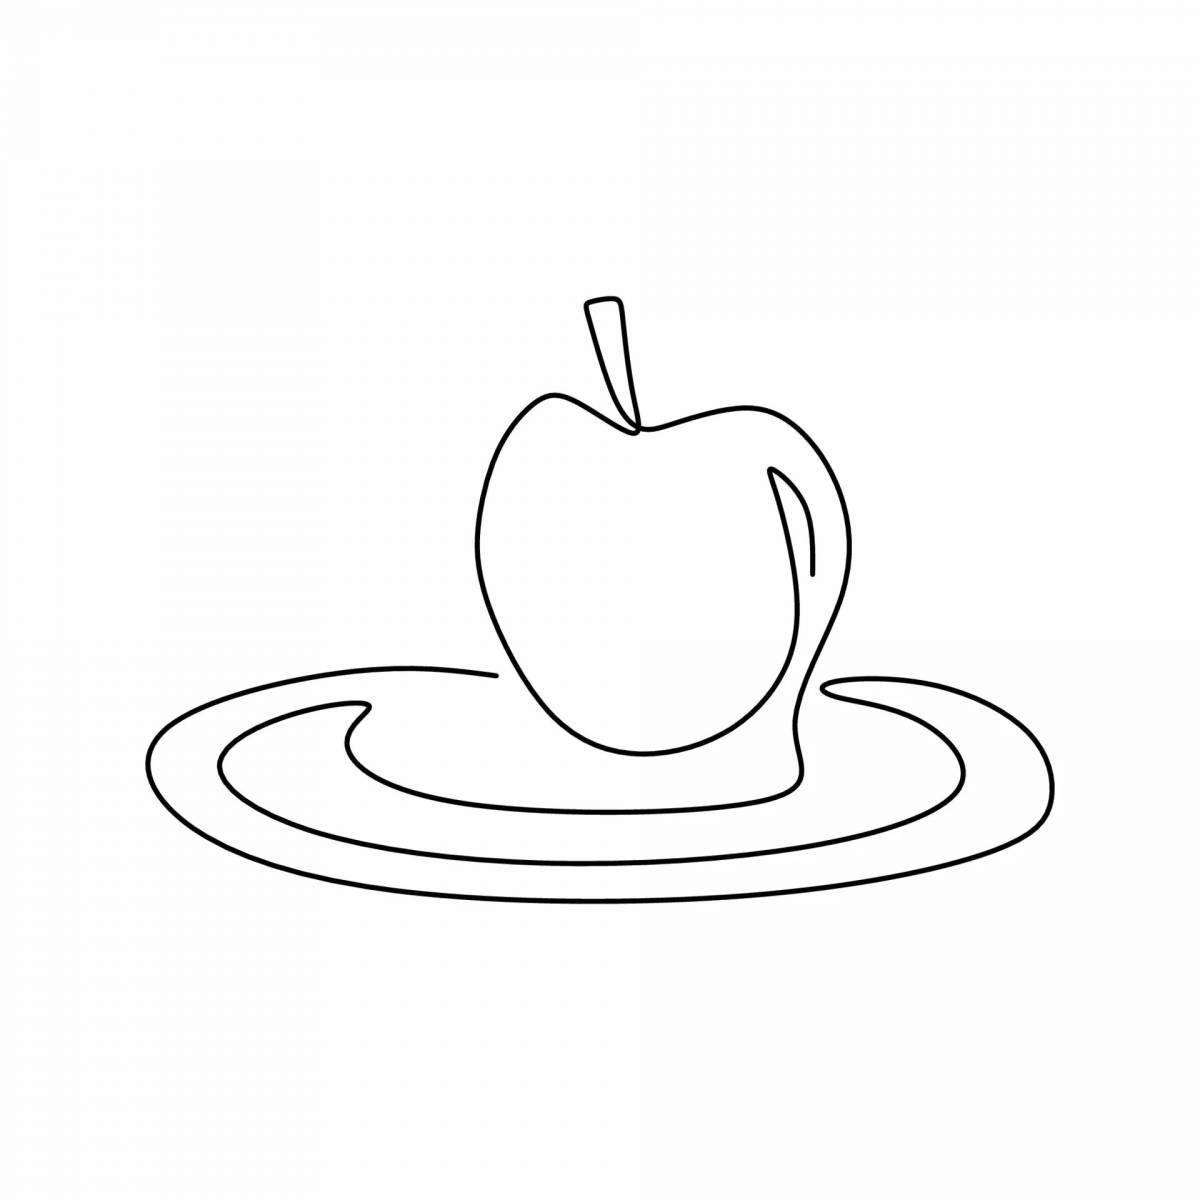 Delicious apple on a plate